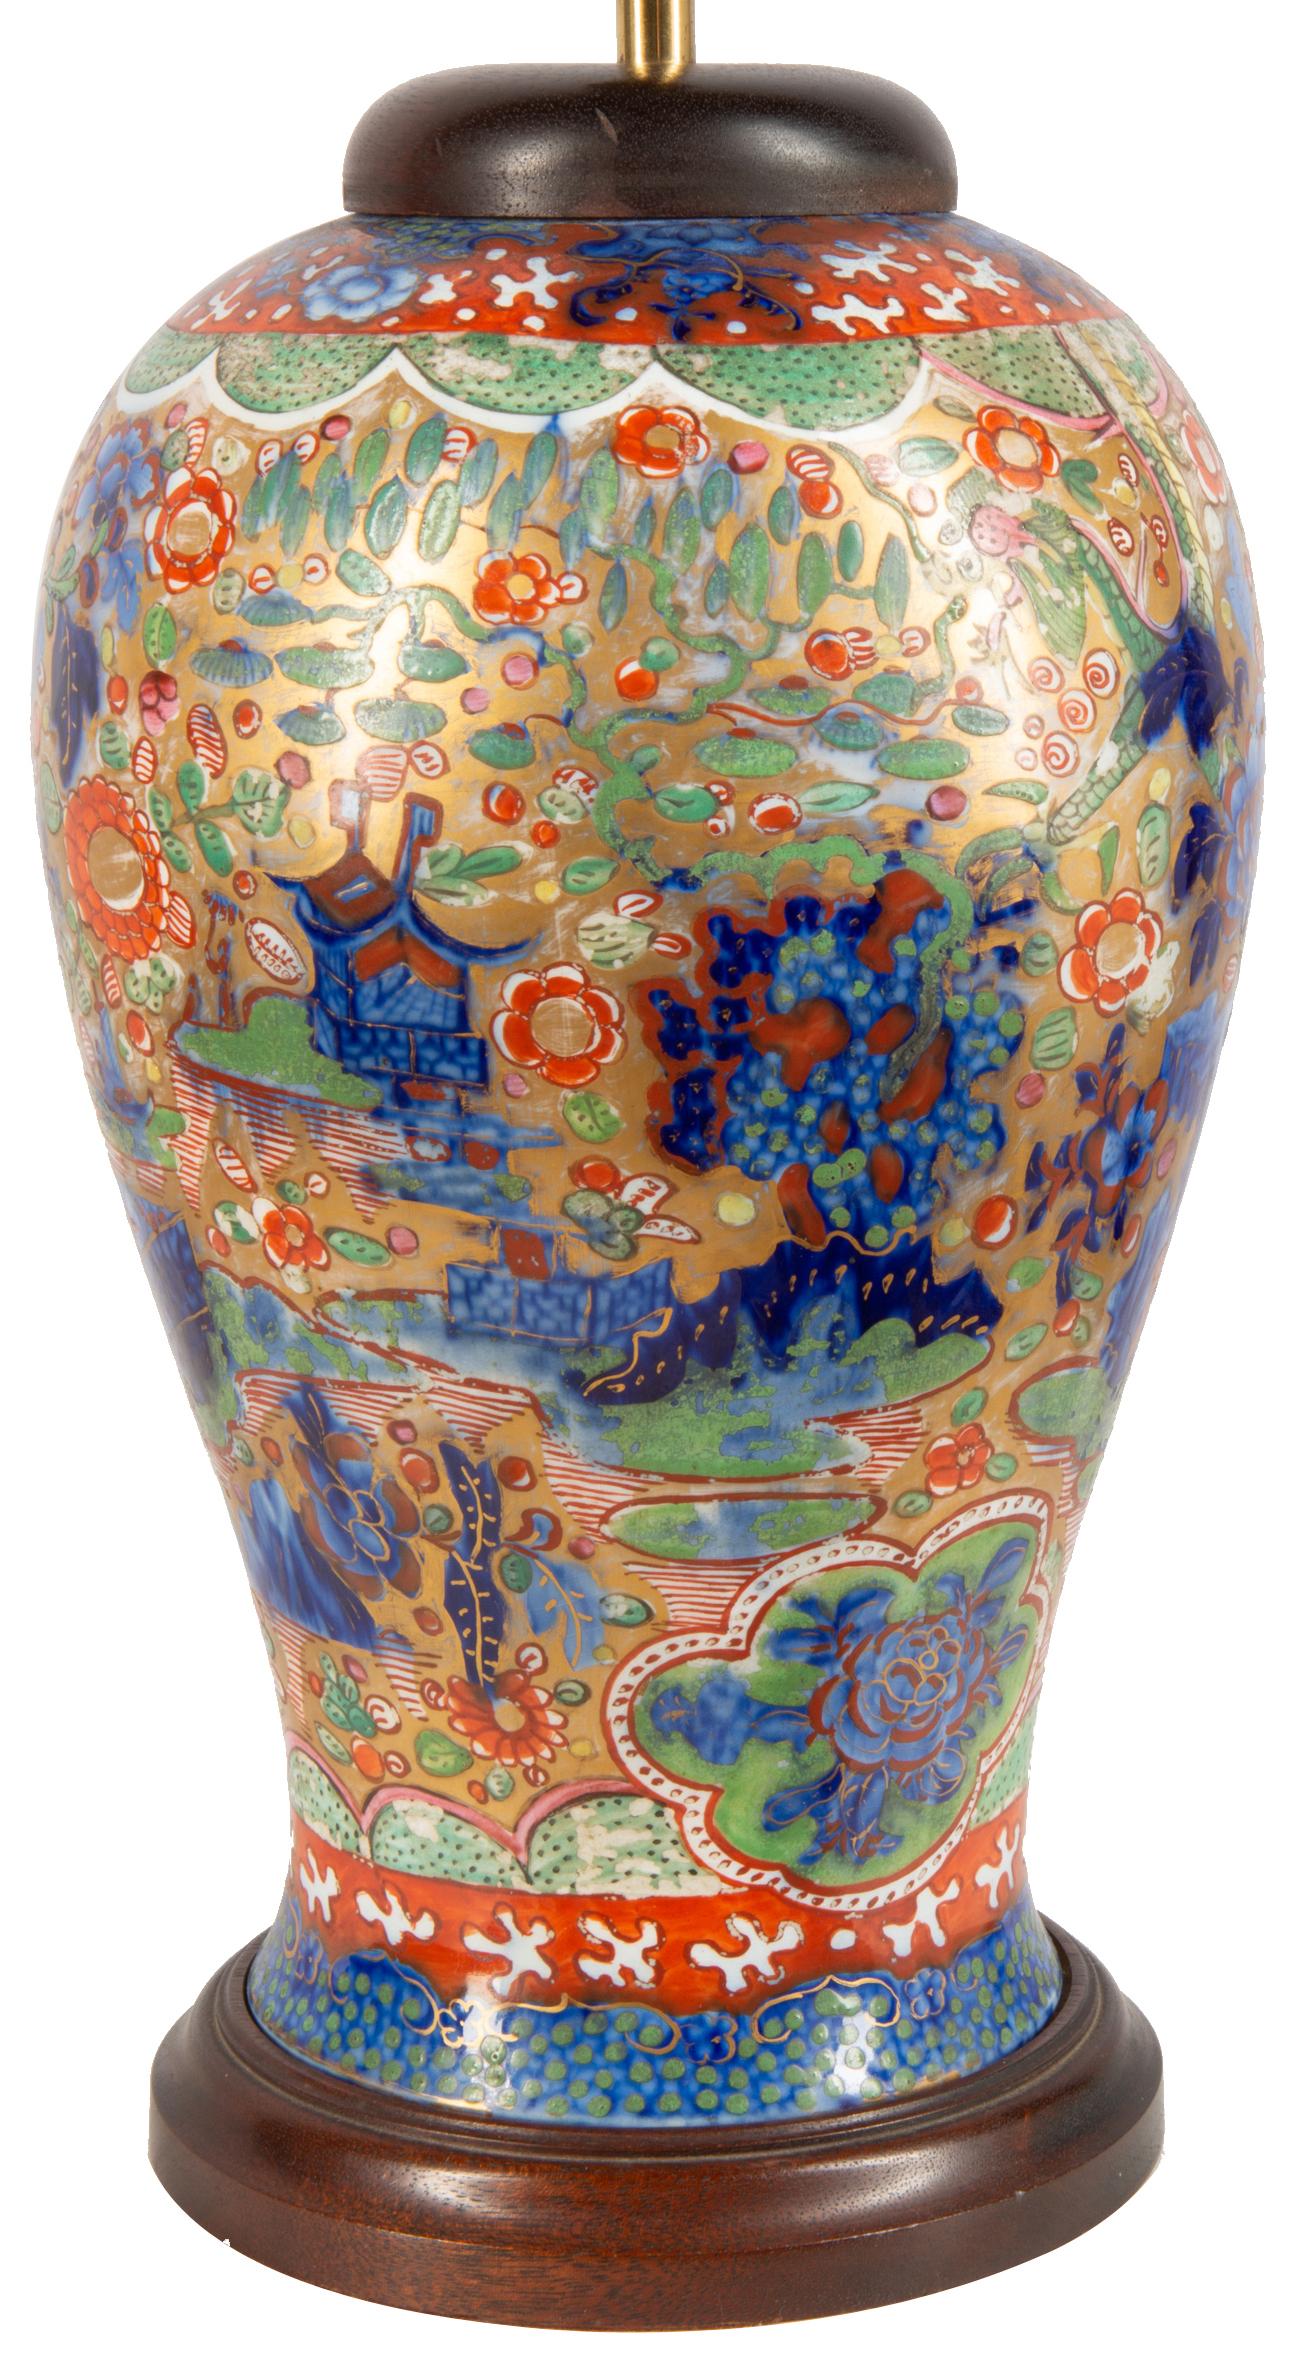 A very decorative 19th century Chinese blue and white later clobbered vase / lamp. Having wonderful bold coloring of flowers and classical motifs on the blue and white ground.